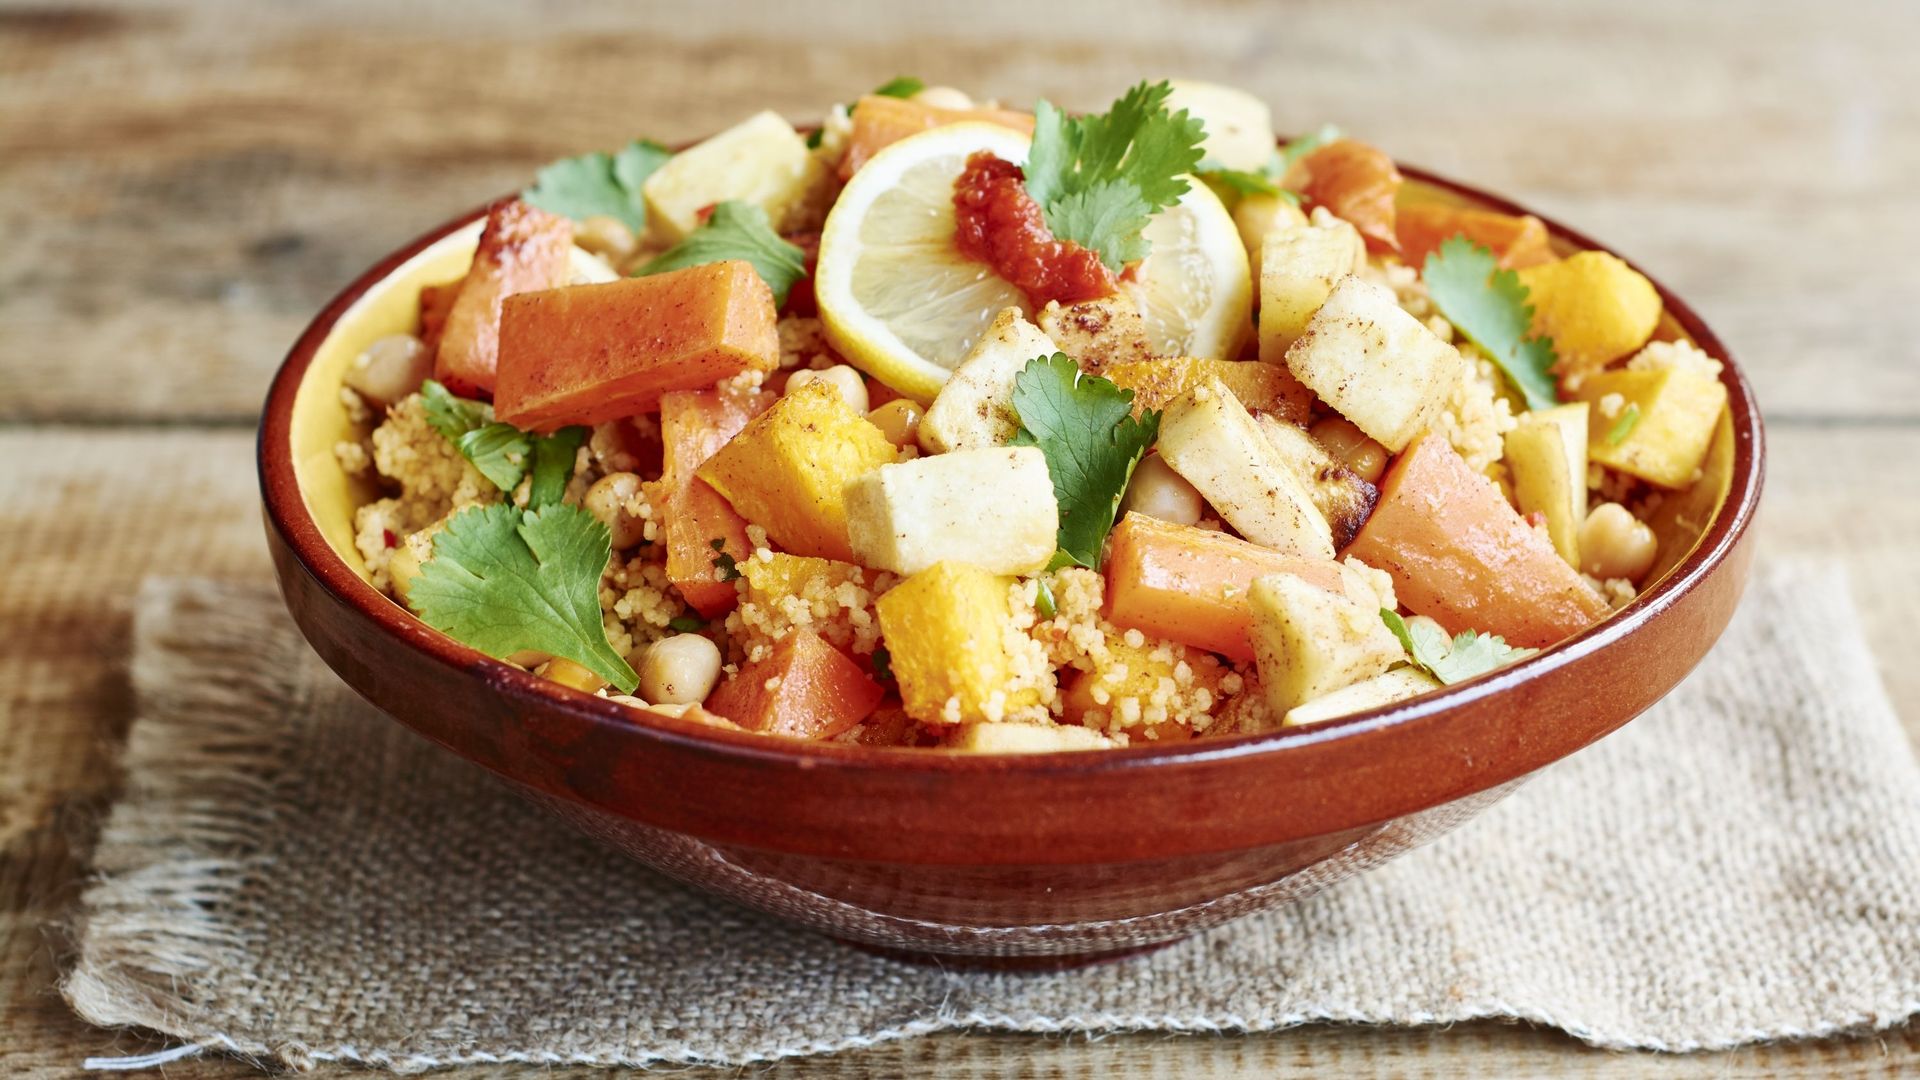 Couscous with vegetables, including carrots, parsnips, pumpkin, shallots, apricots and chickpeas